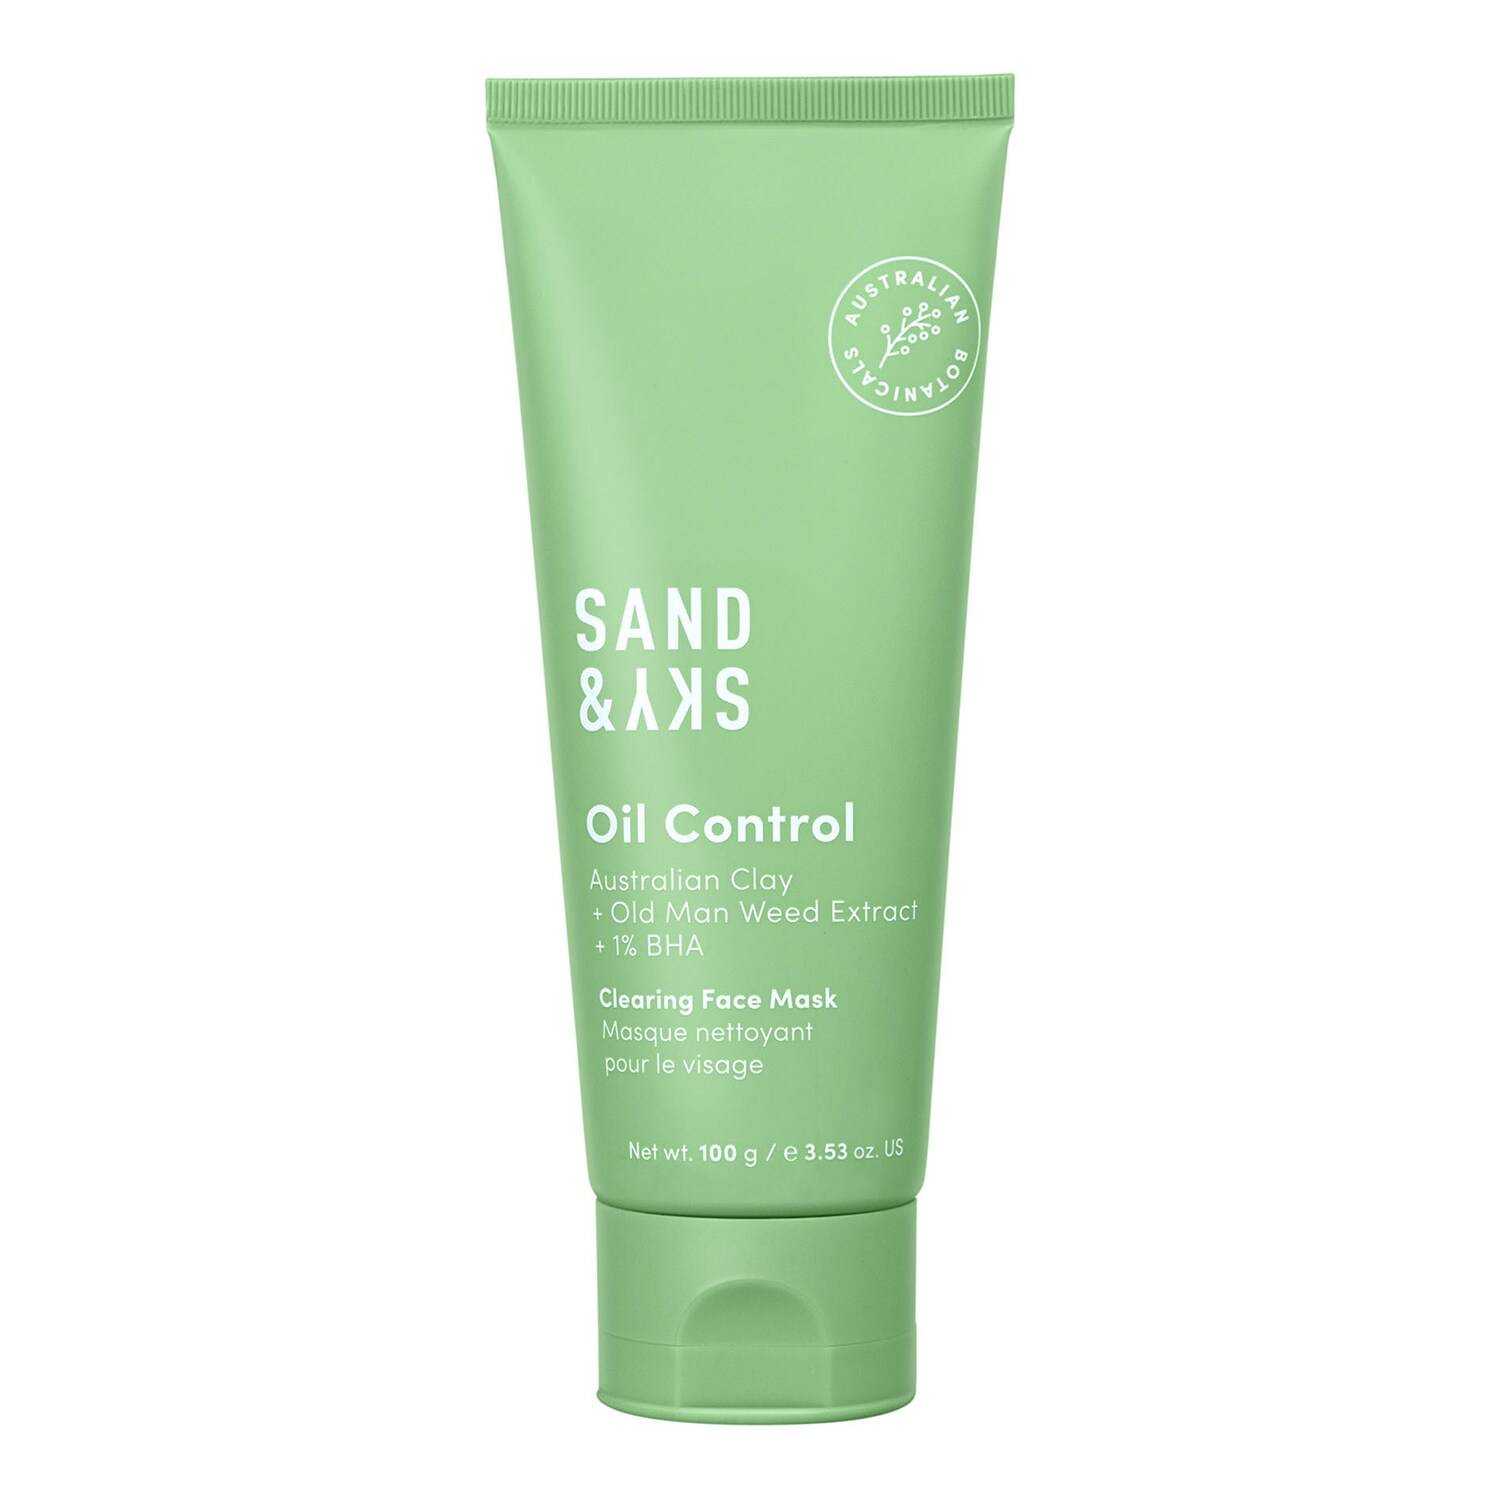 Sand & Sky Oil Control - Clearing Face Mask 100G